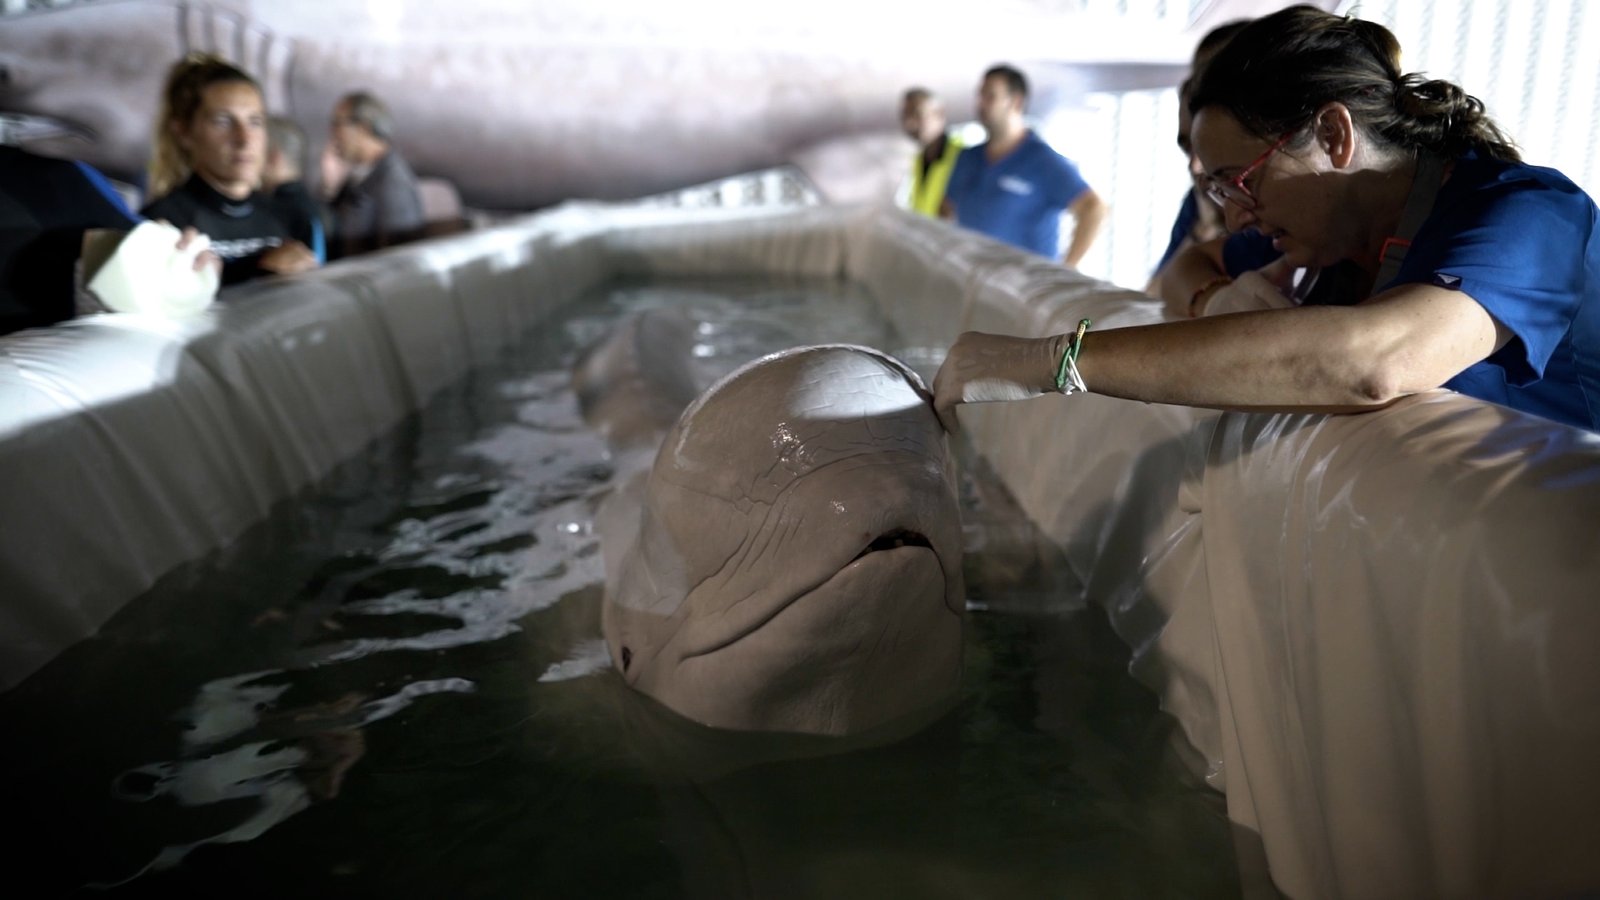 Beluga whales rescued in ‘high-risk’ operation | Conflict